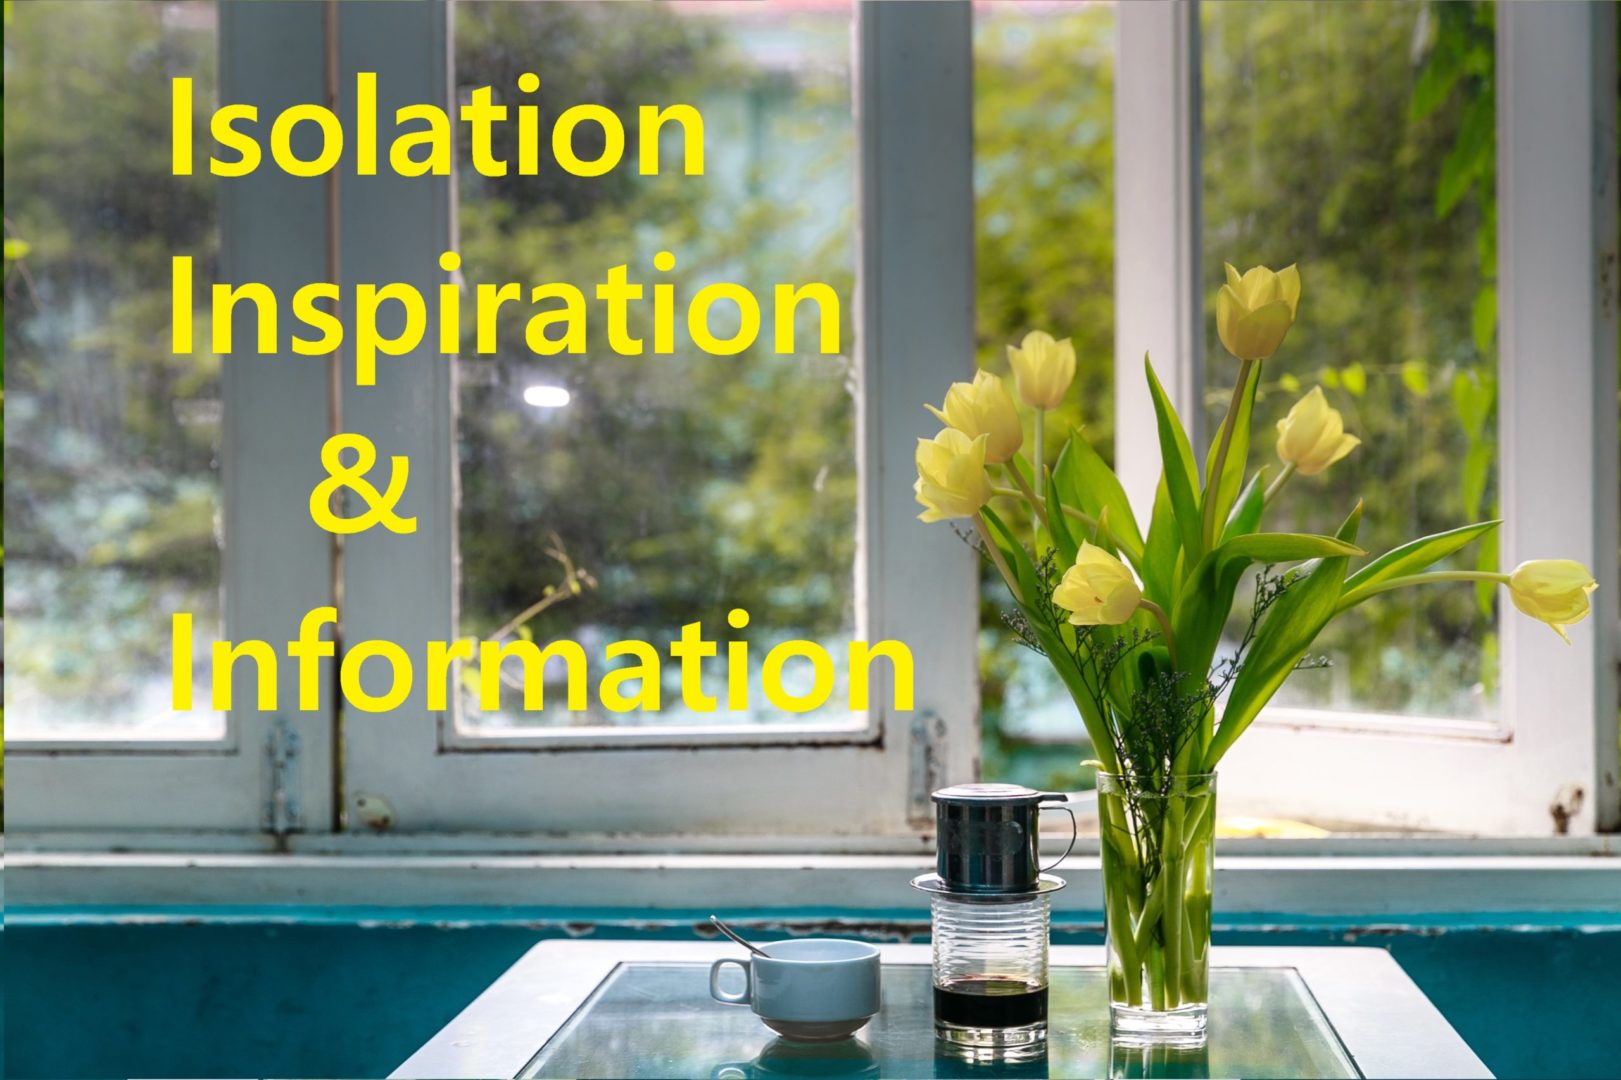 Rural Coffee Caravan Isolation Inspiration & Information,image of open window beneath which a table is set with cuppa and vase of yellow tulips on a sunny day and the wording Isolation Inspiration & Information